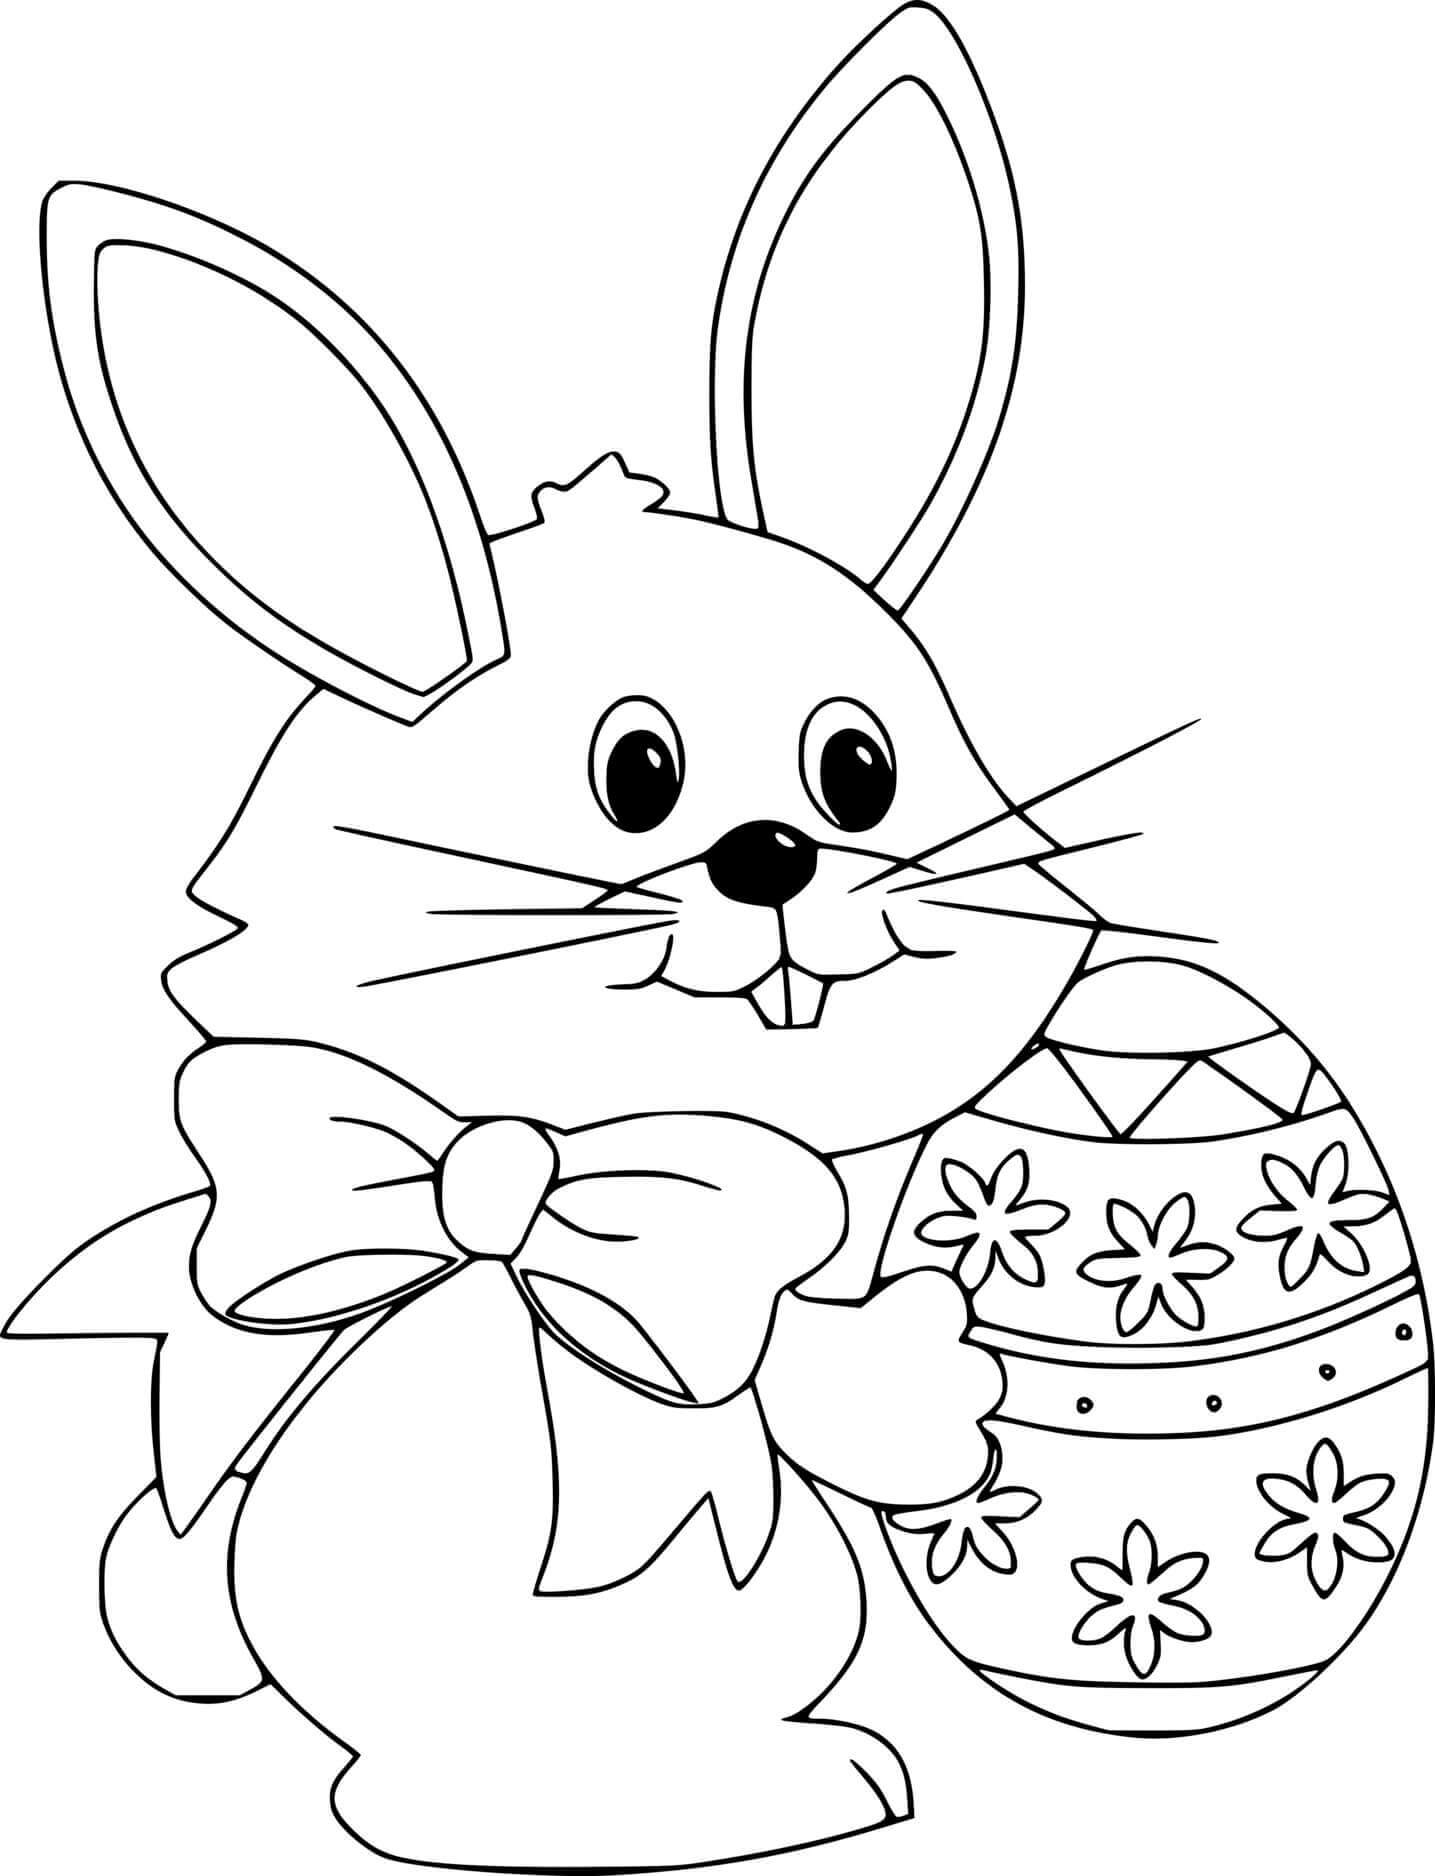 Bunny With A Flower Easter Egg Coloring Page